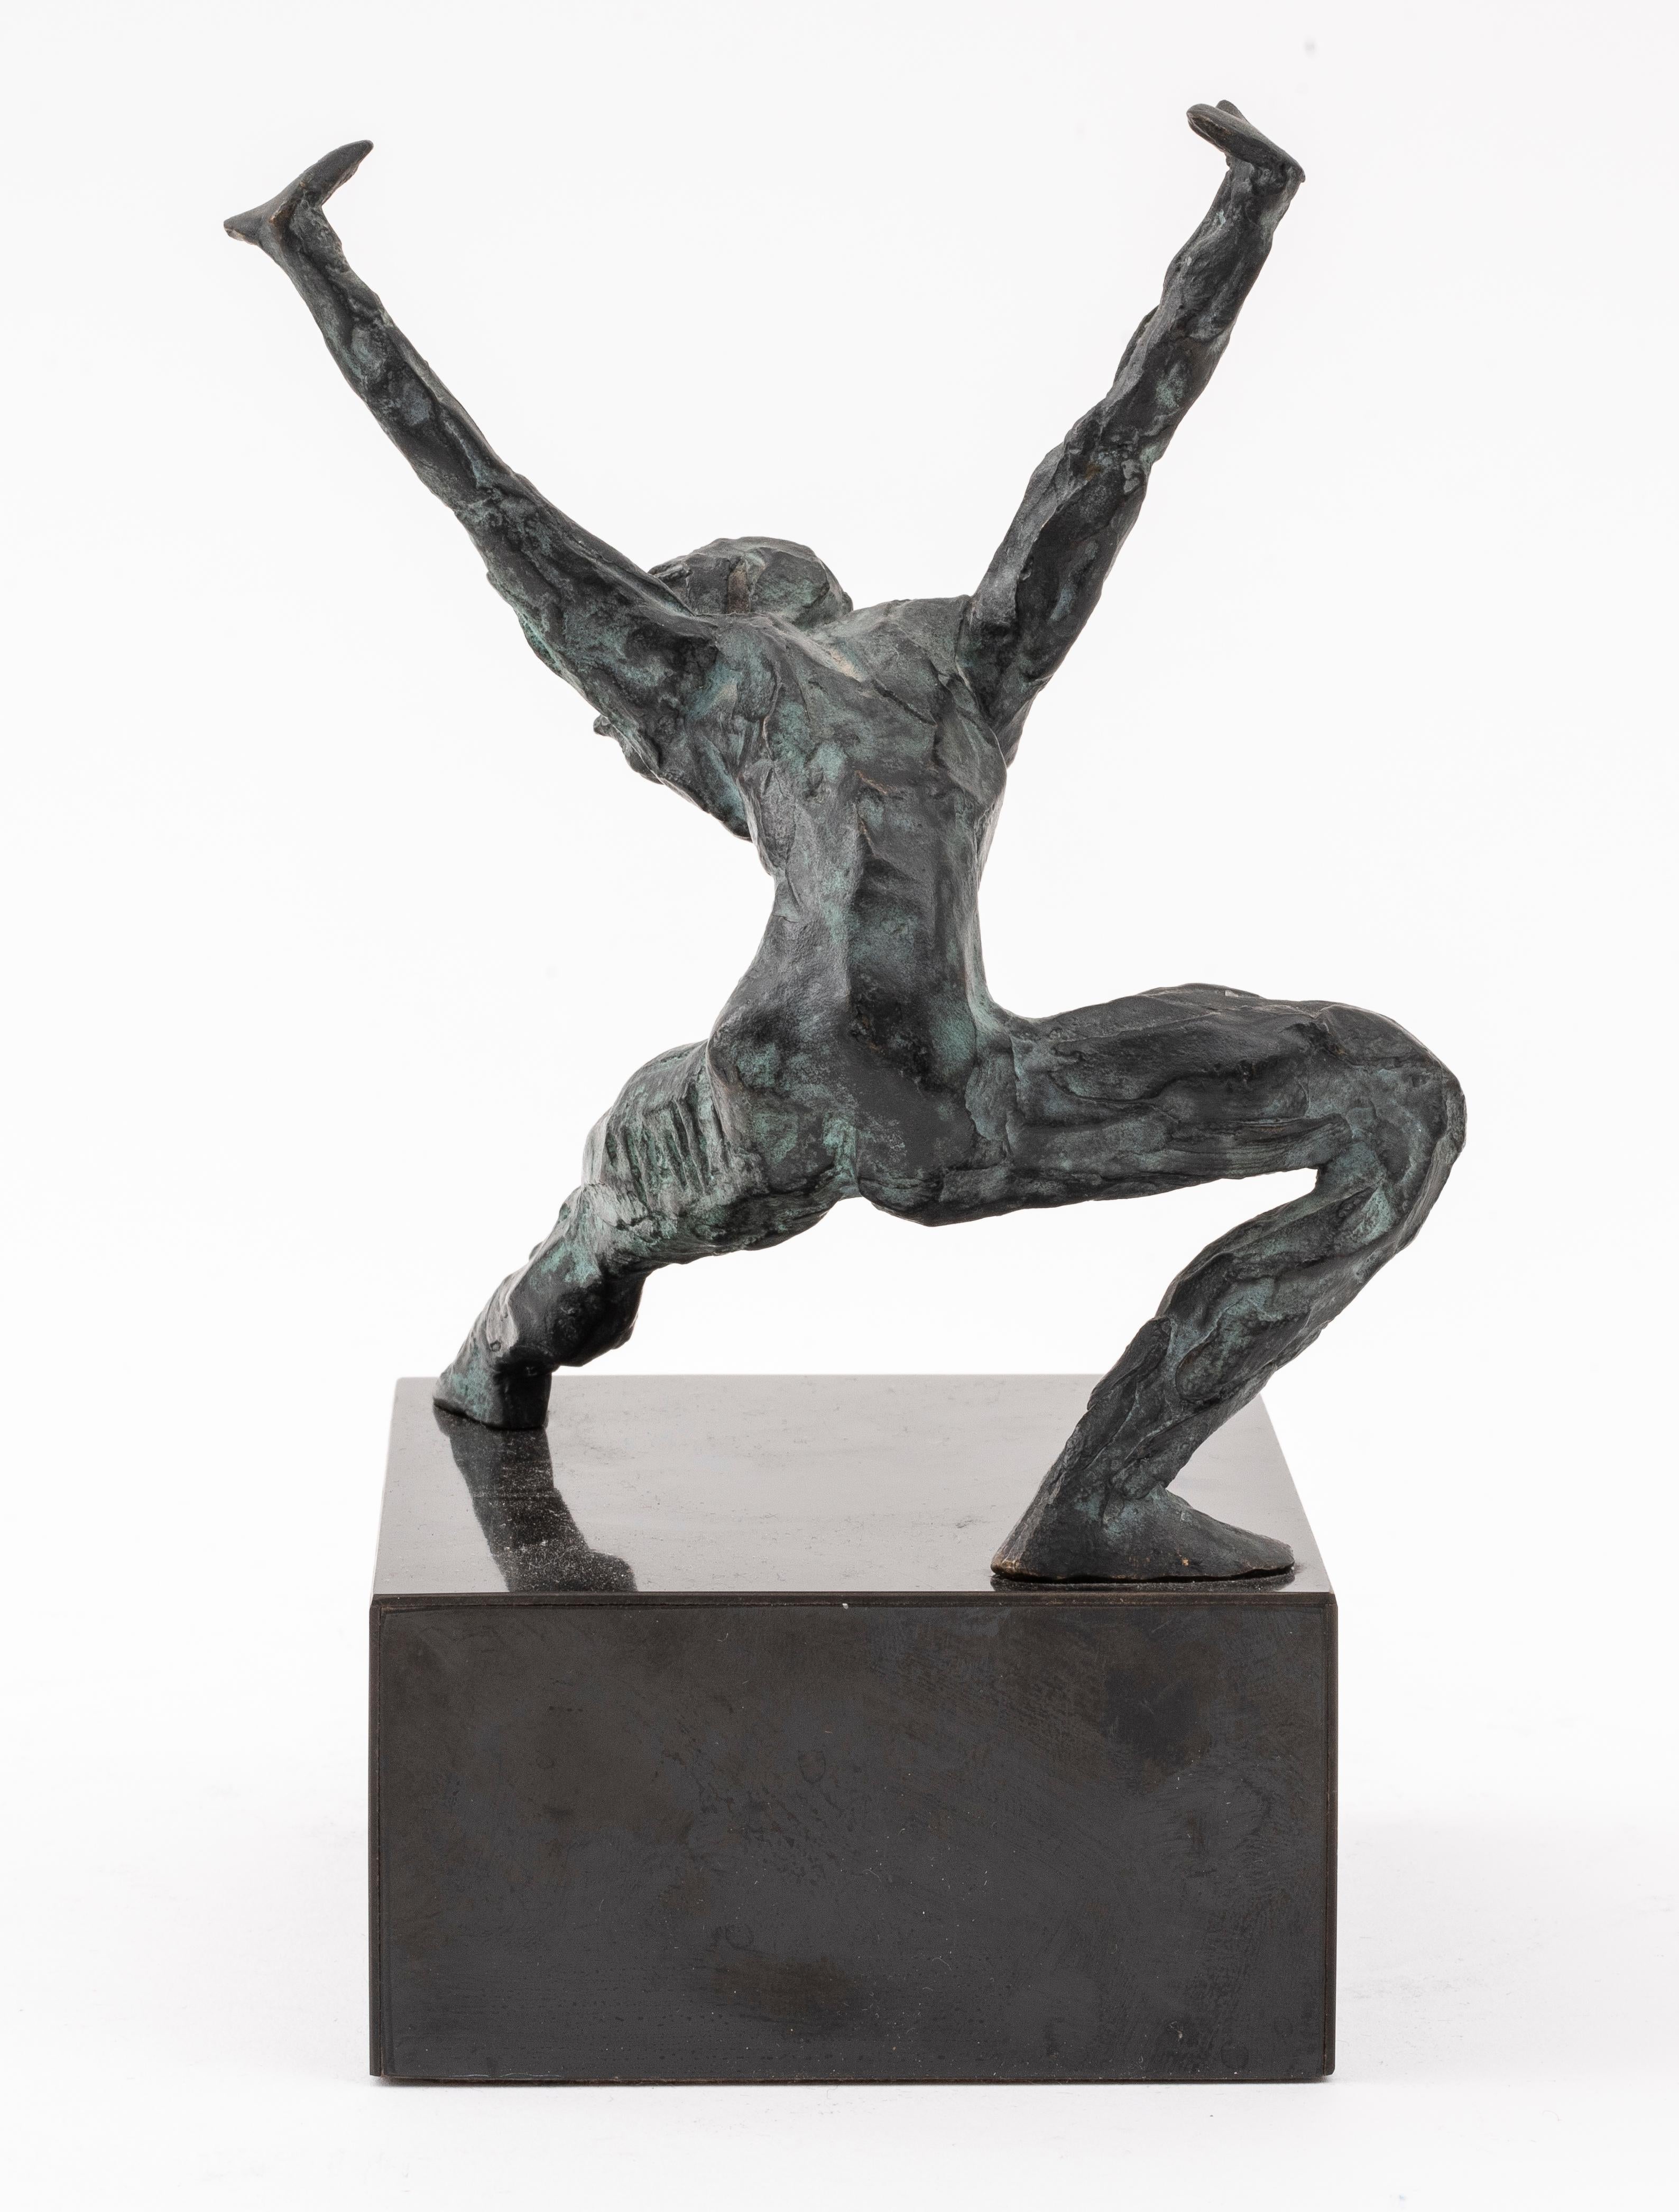 Maher, dancing male nude, bronze sculpture, signed, attached to base. Measures: 8